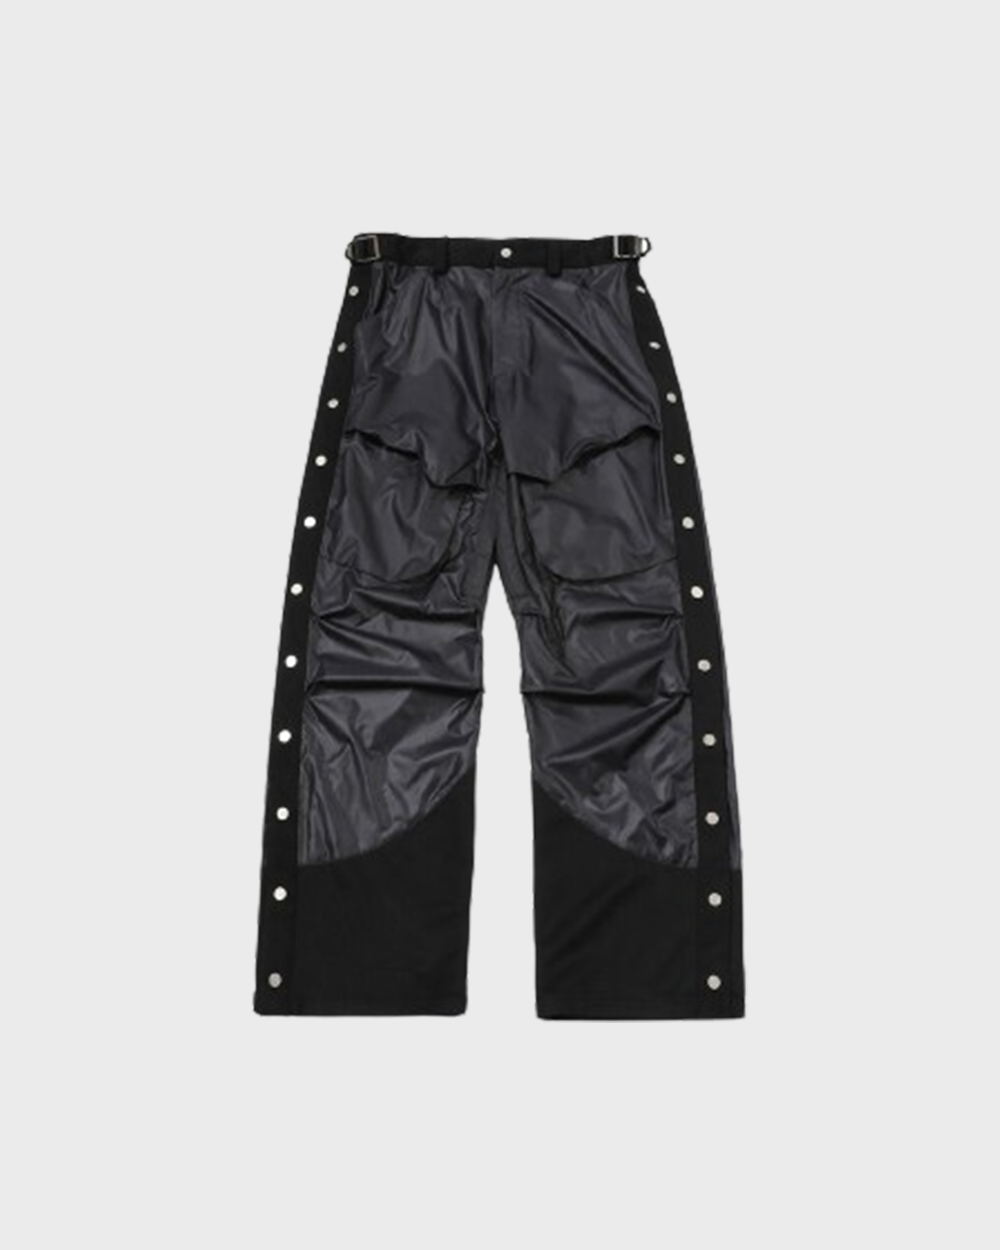 Suede Stitched Side Button Pants (Black)